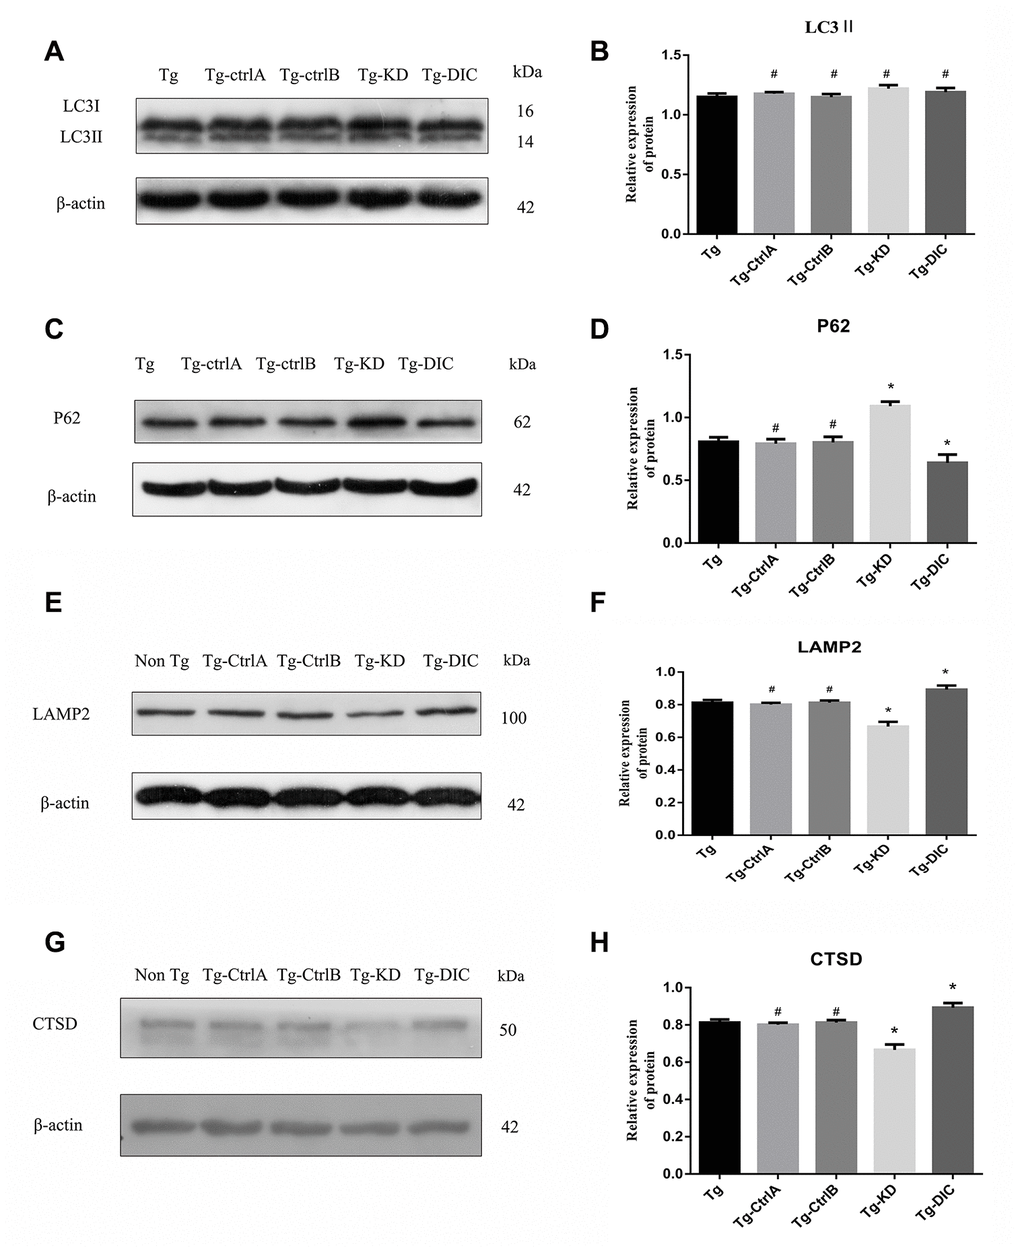 DIC promoted the degradation of hippocampal autophagosomes and improved the function of lysosomes in APP/PS1 double transgenic mice. (A–D) Western blot analysis of (A, B) LC3II, and (C, D) P62 in each group. (E–H) Western blot analysis of (E, F) LAMP2, and (G–H) CTSD in each group. The data represent as mean ± SEM of a typical series of 3 experiments. (# P>0.05,* P